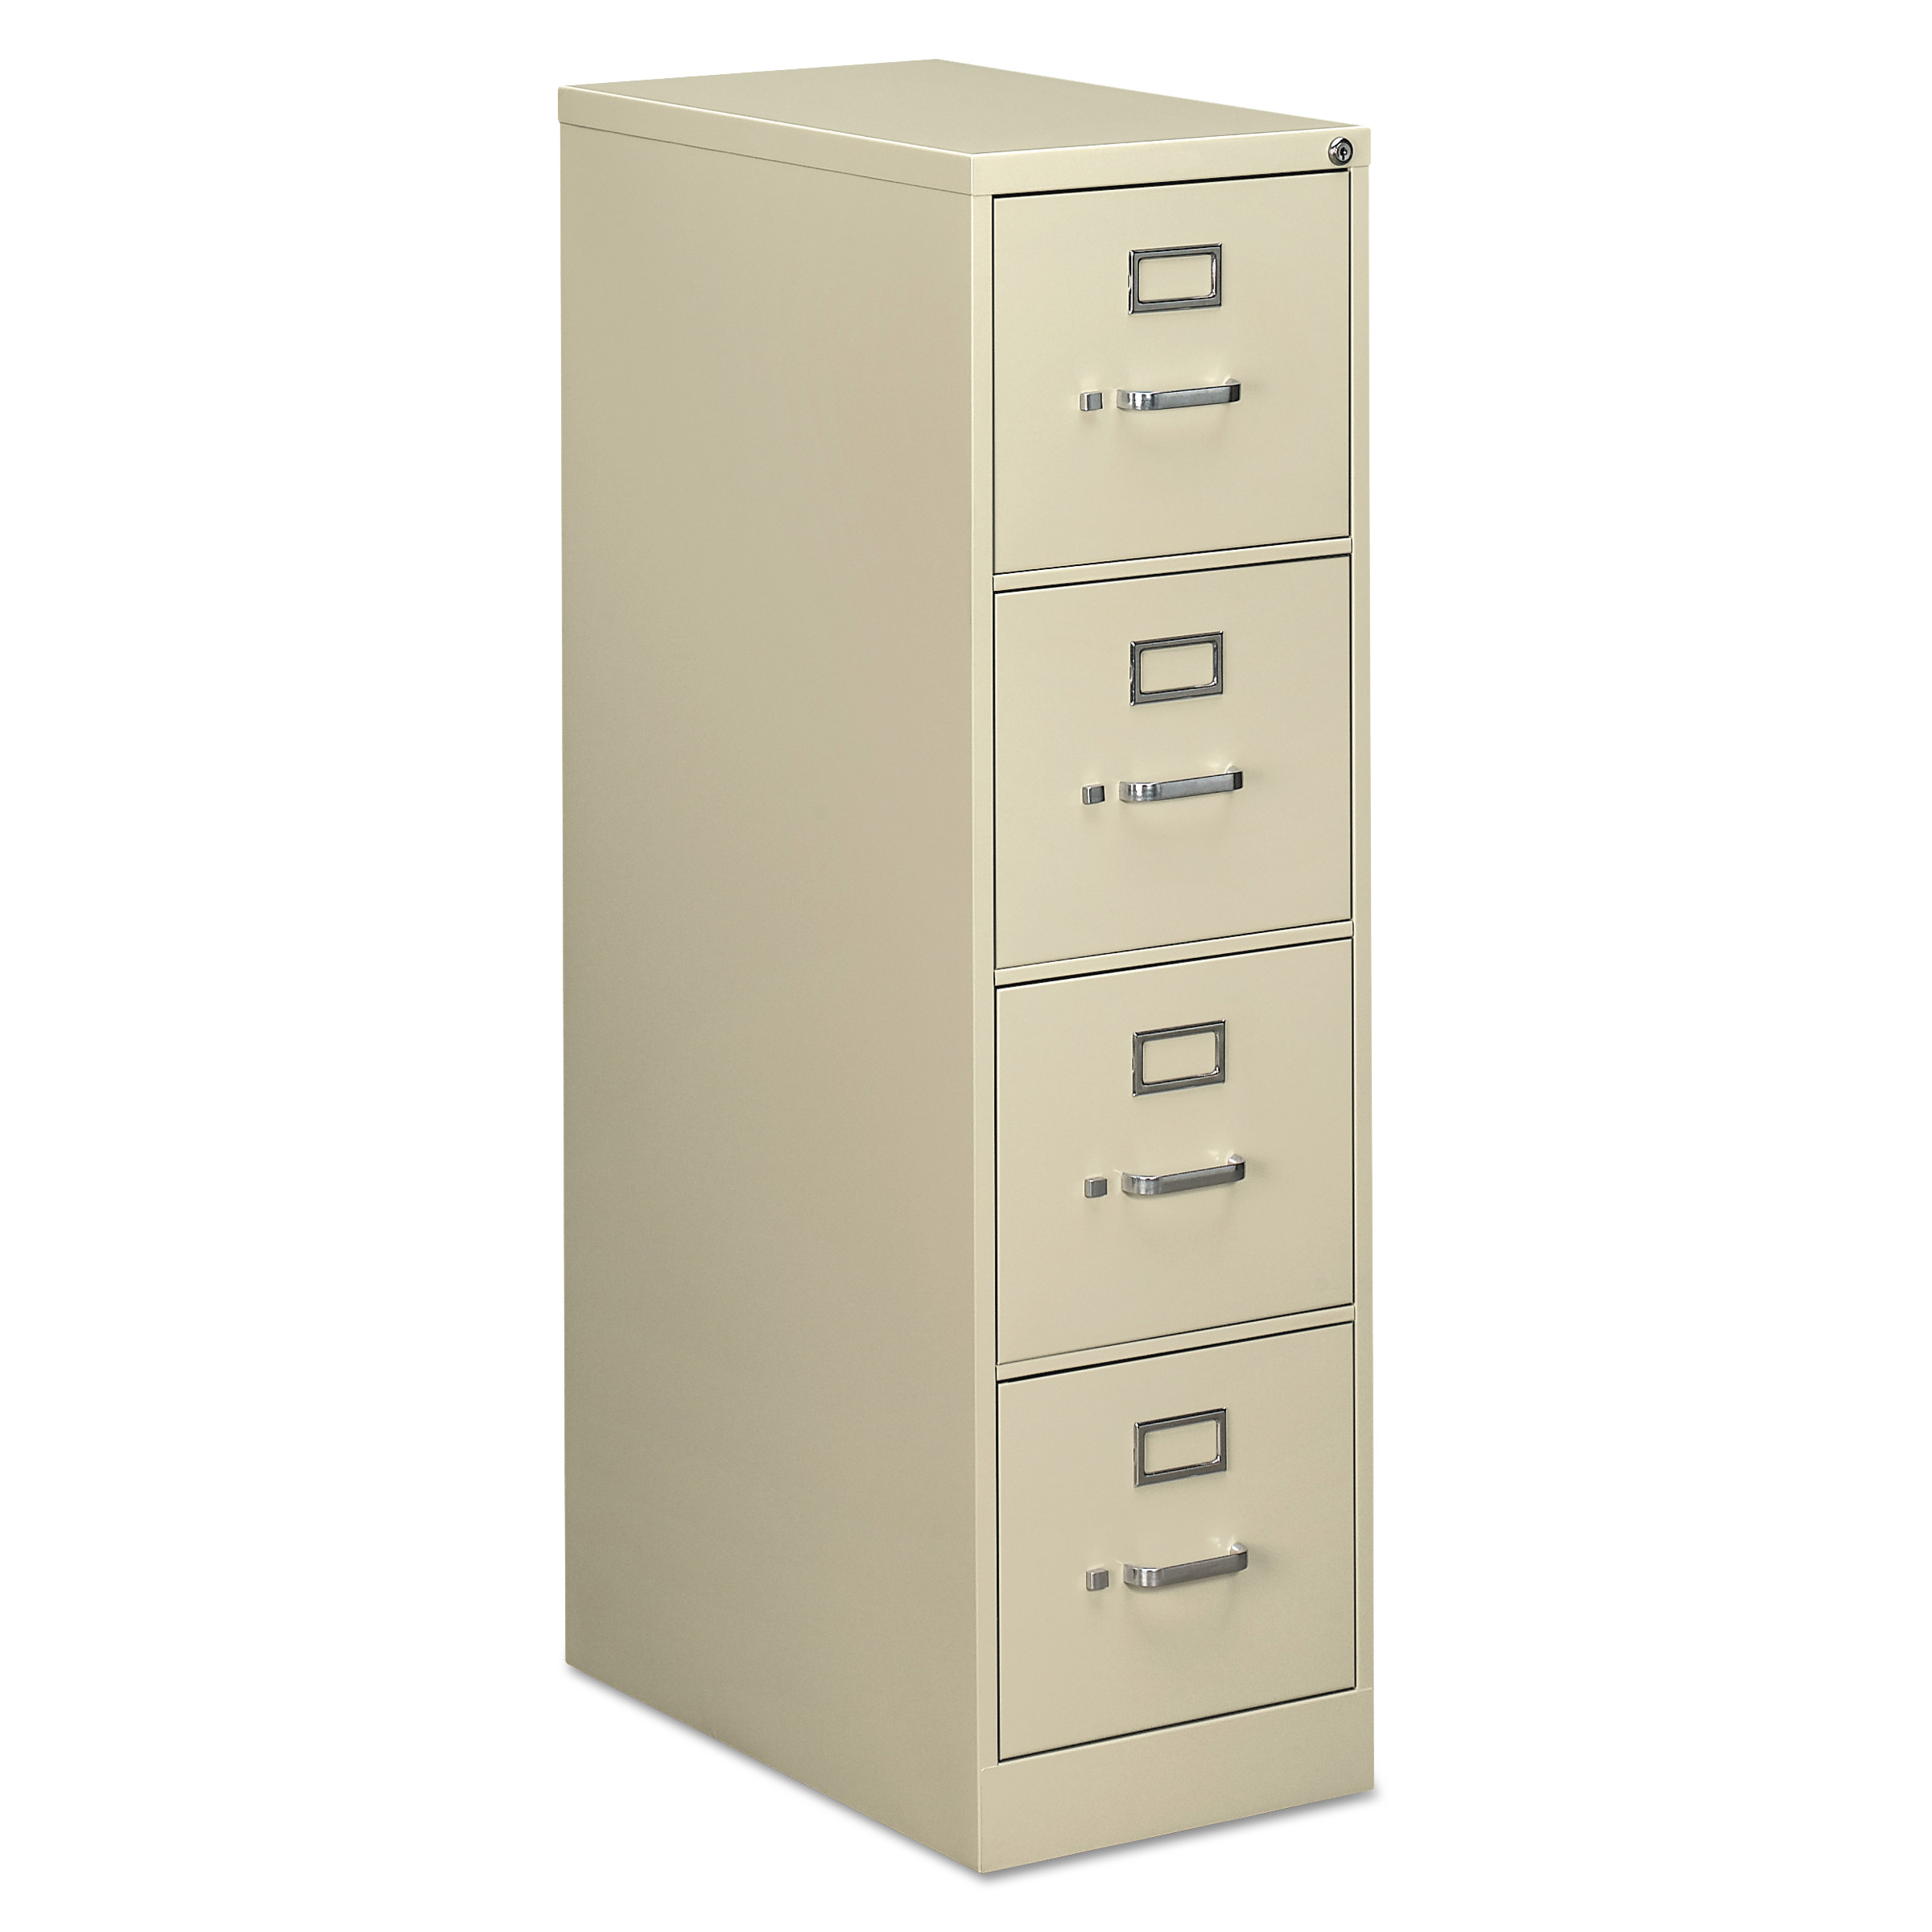 Four-Drawer Economy Vertical File, Letter, 15w x 26 1/2d x 52h, Putty